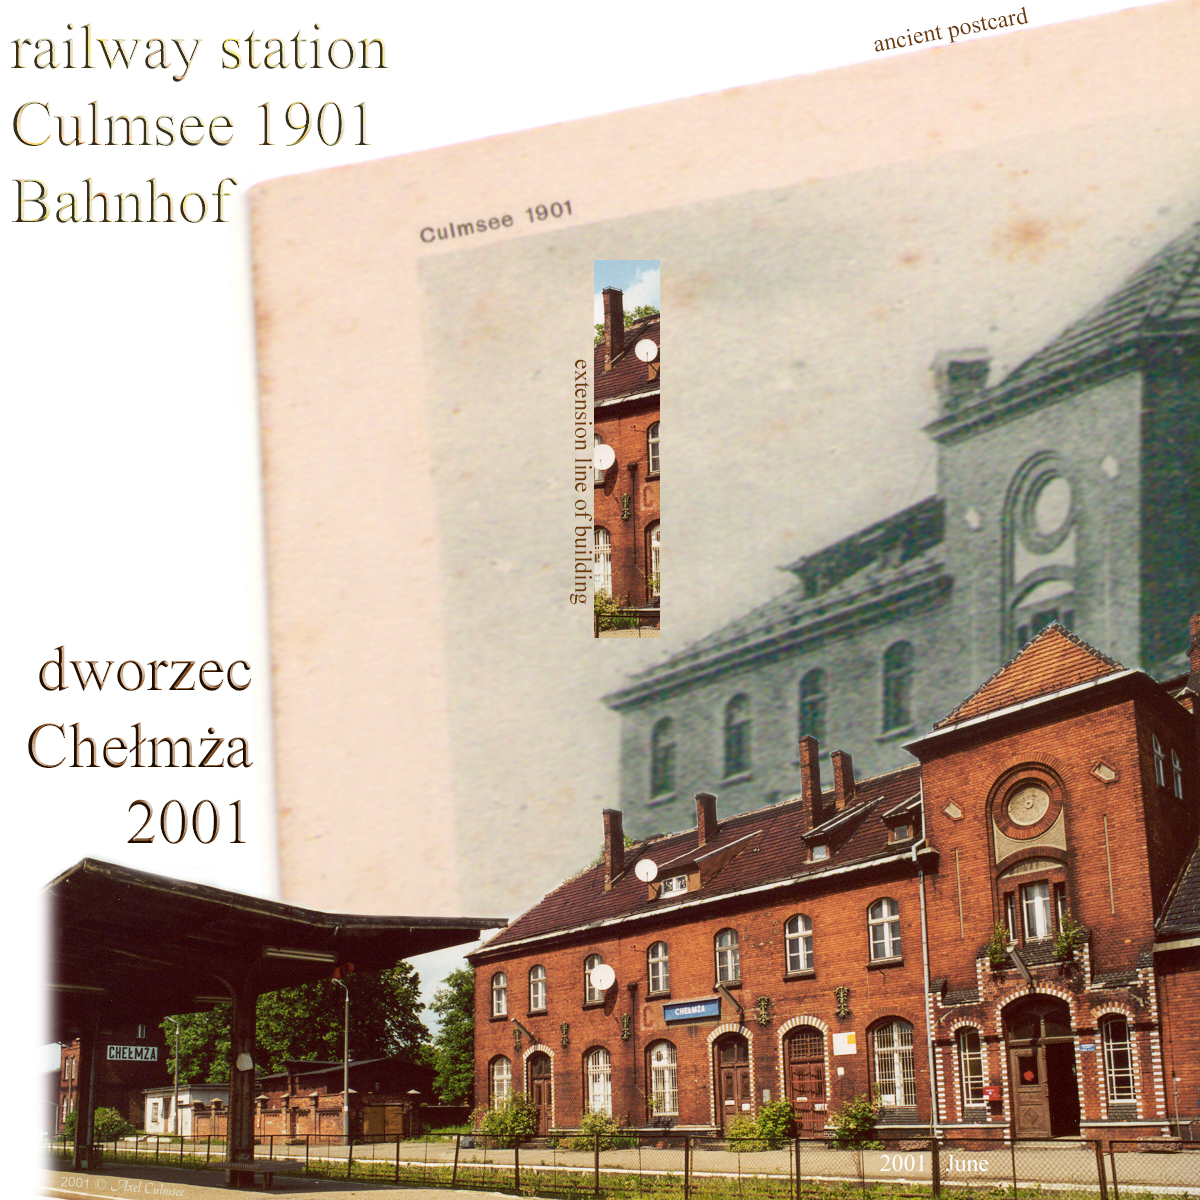 Culmsee 1901 Chelmza 2001 railway station annexe of building